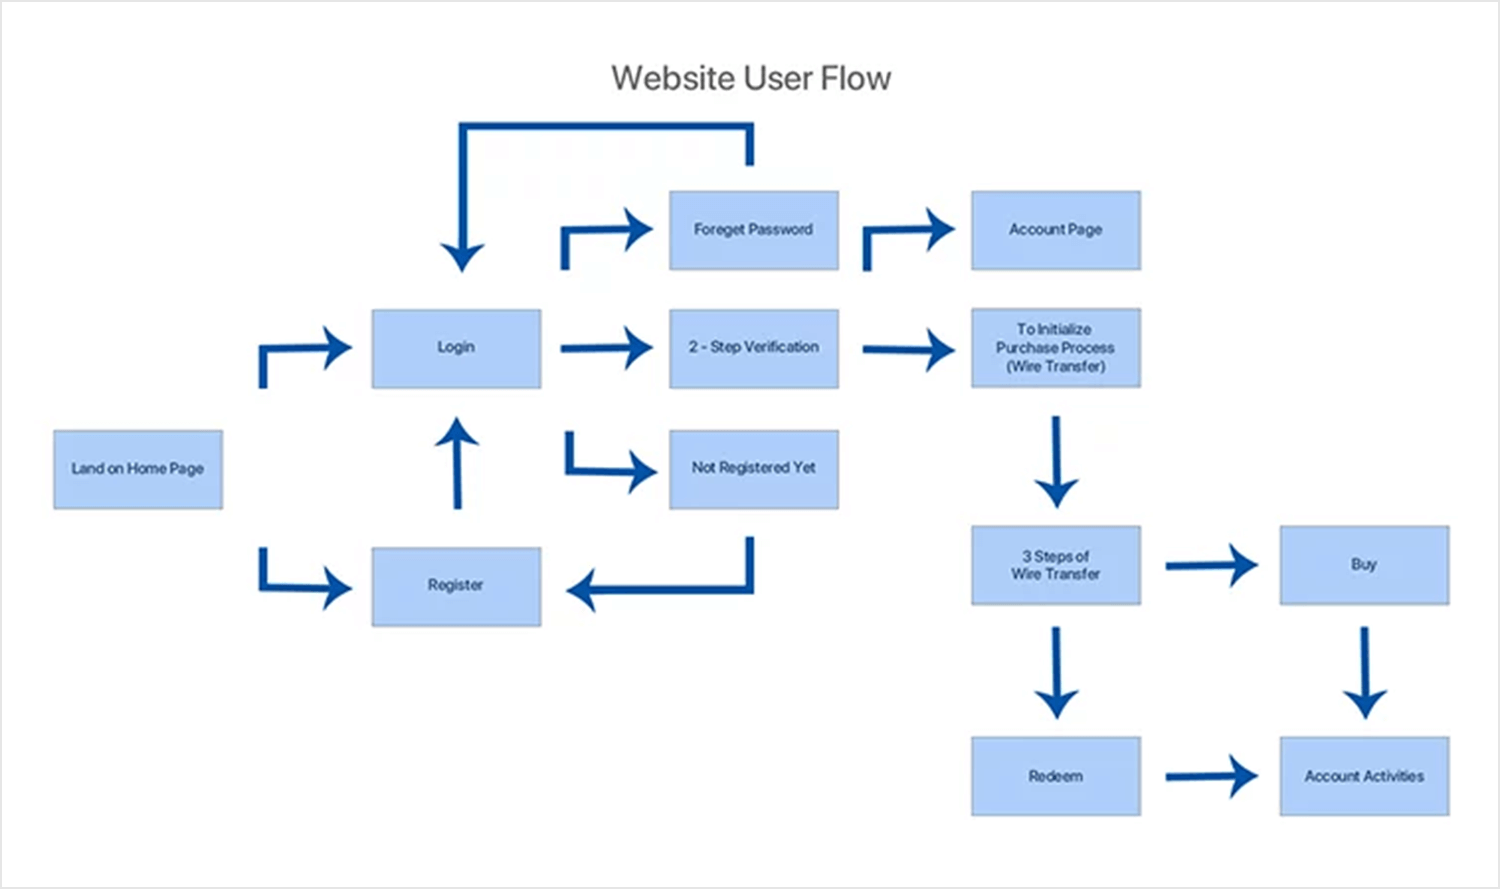 Website user flow showing the steps from landing on the homepage to purchasing a product and account activities